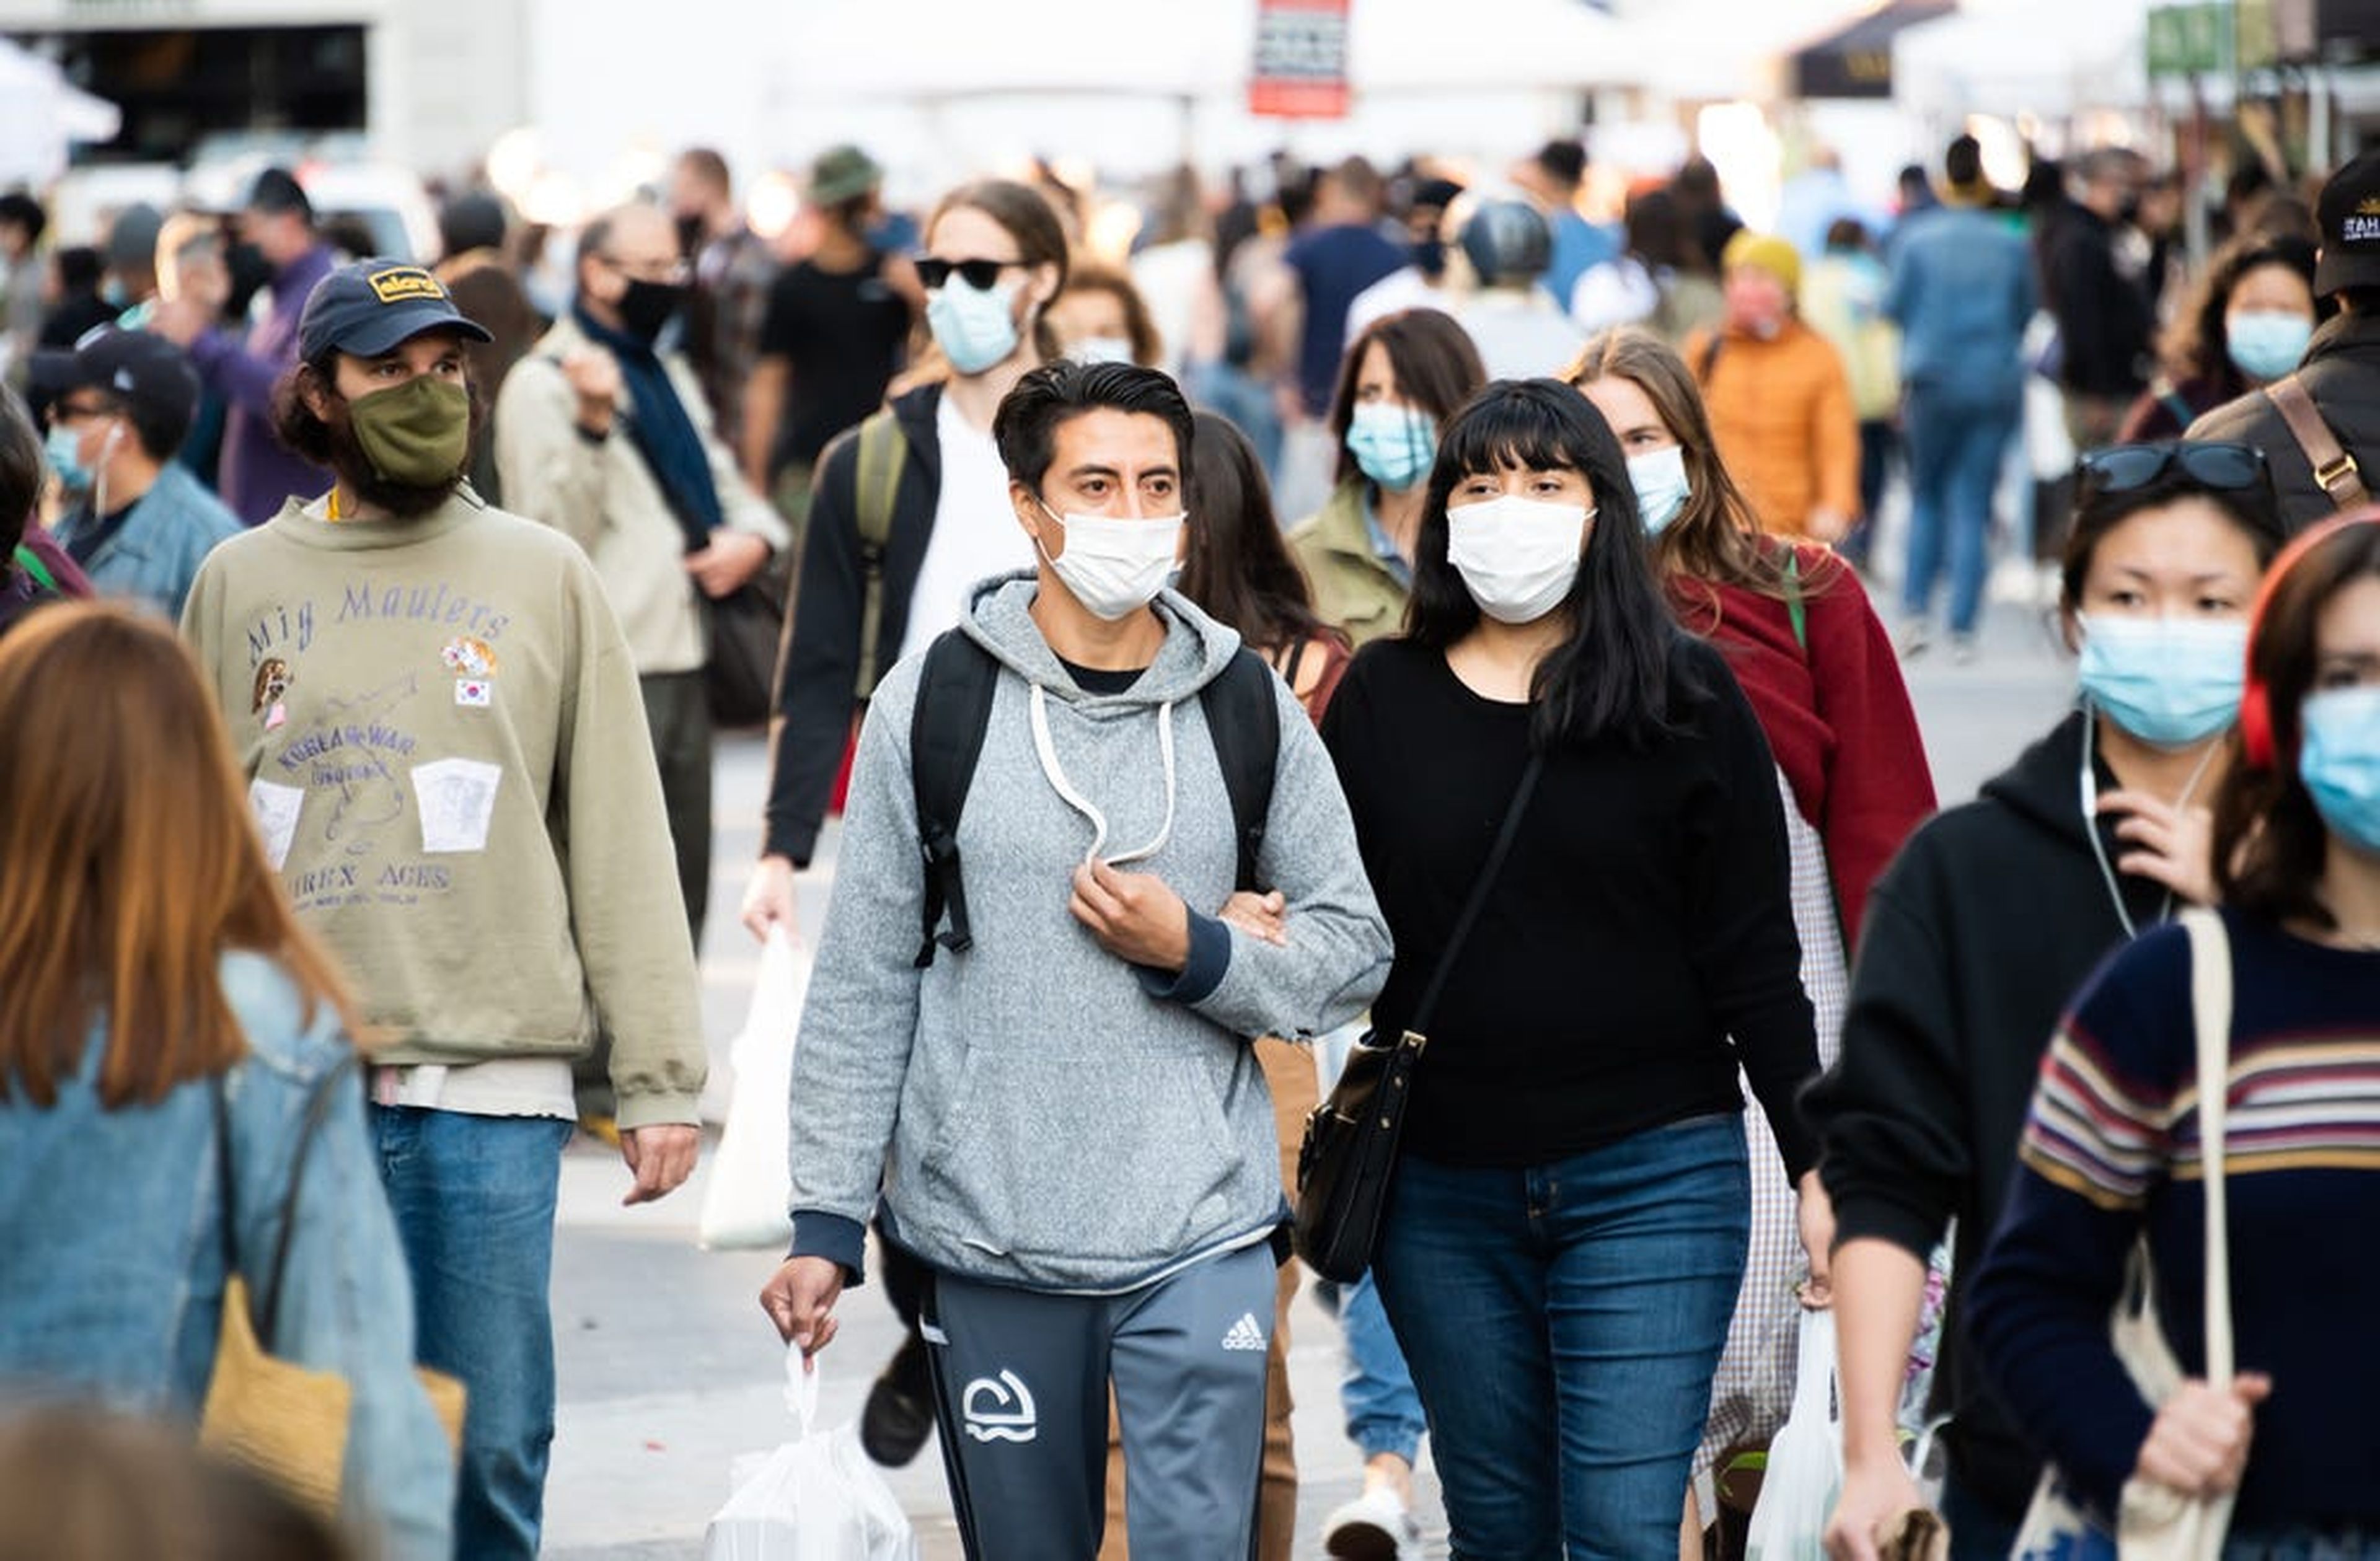 People wear face masks at the Union Square Greenmarket on September 19, 2020, in New York City.